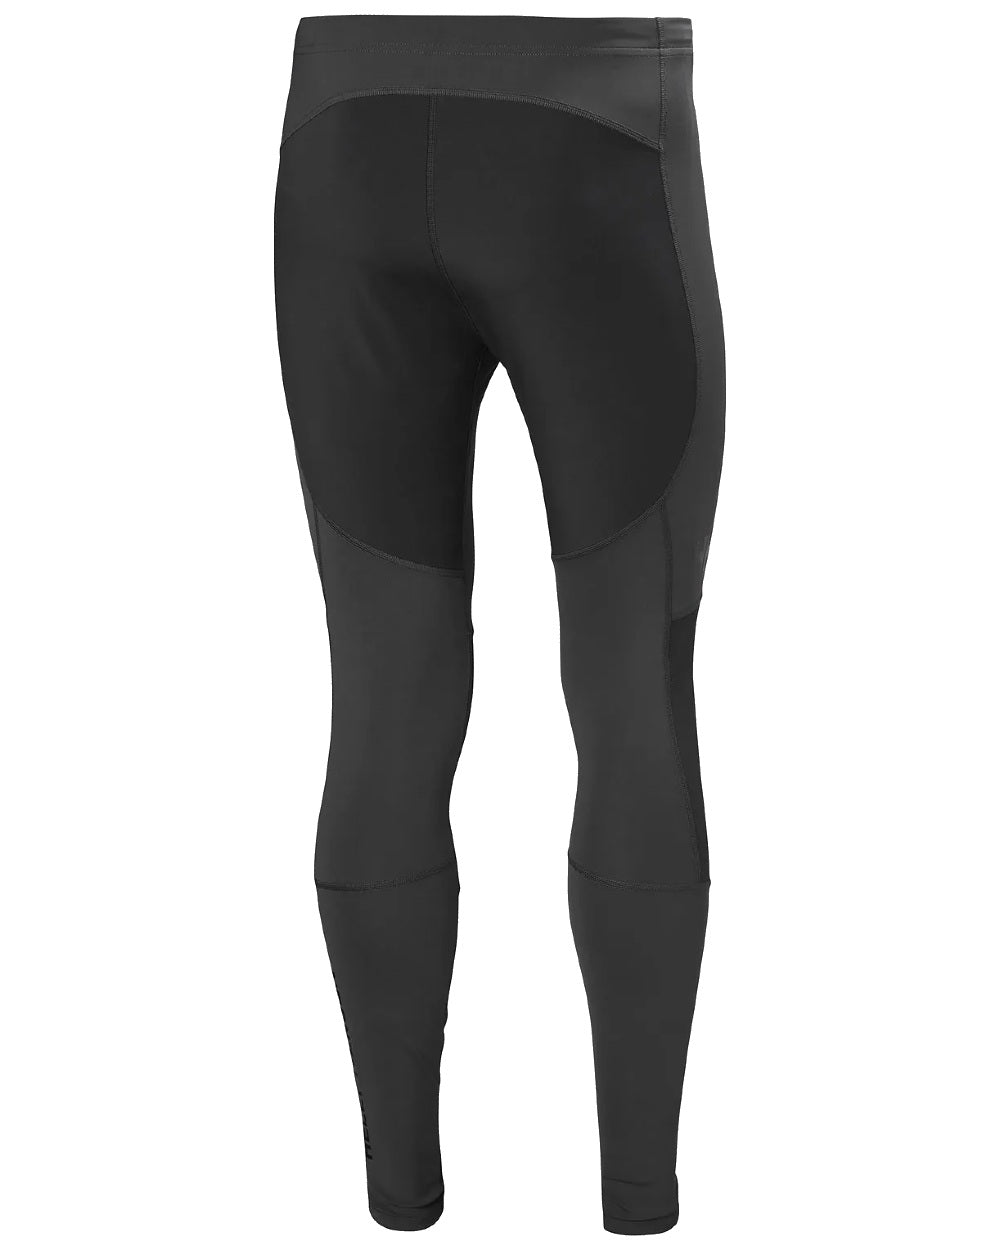 Ebony coloured Helly Hansen Mens Deck Tough Sailing Tights on white background 